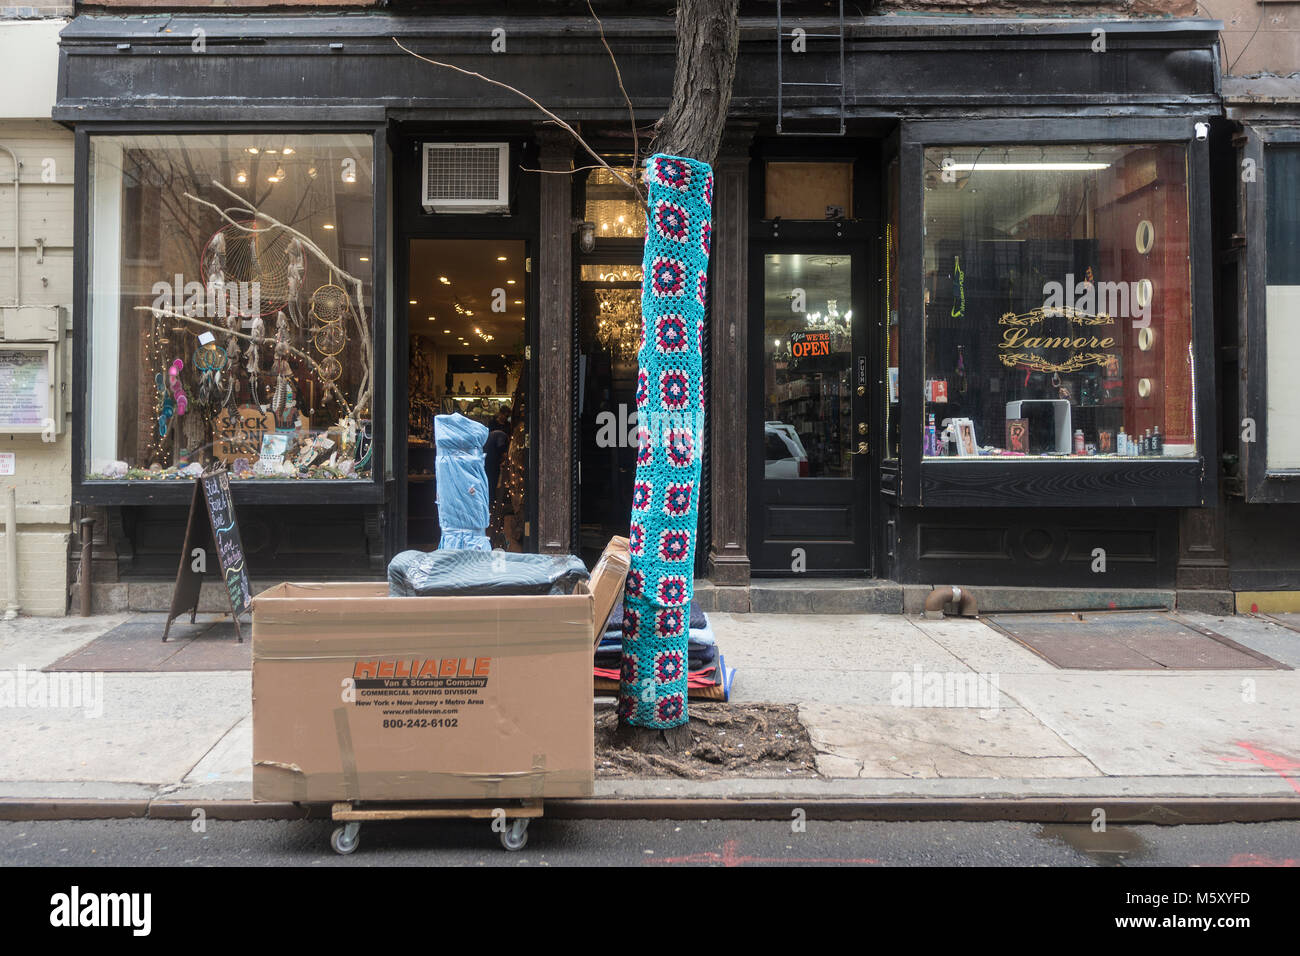 New York, NY, USA, 26 Feb 2018 - Beginning in November, shop keeper Holly Boardman, owner of local lingerie store Musèe Lingerie, began swaddling the trees in yarn. All in all, she used 1500 squares of yarn to cover the trees on Christopher Street in the West Village. The Parks Department has since given her until March to remove the chocheted covers for fear they could damage the trees. ©Stacy Walsh Rosenstock/Alamy Stock Photo